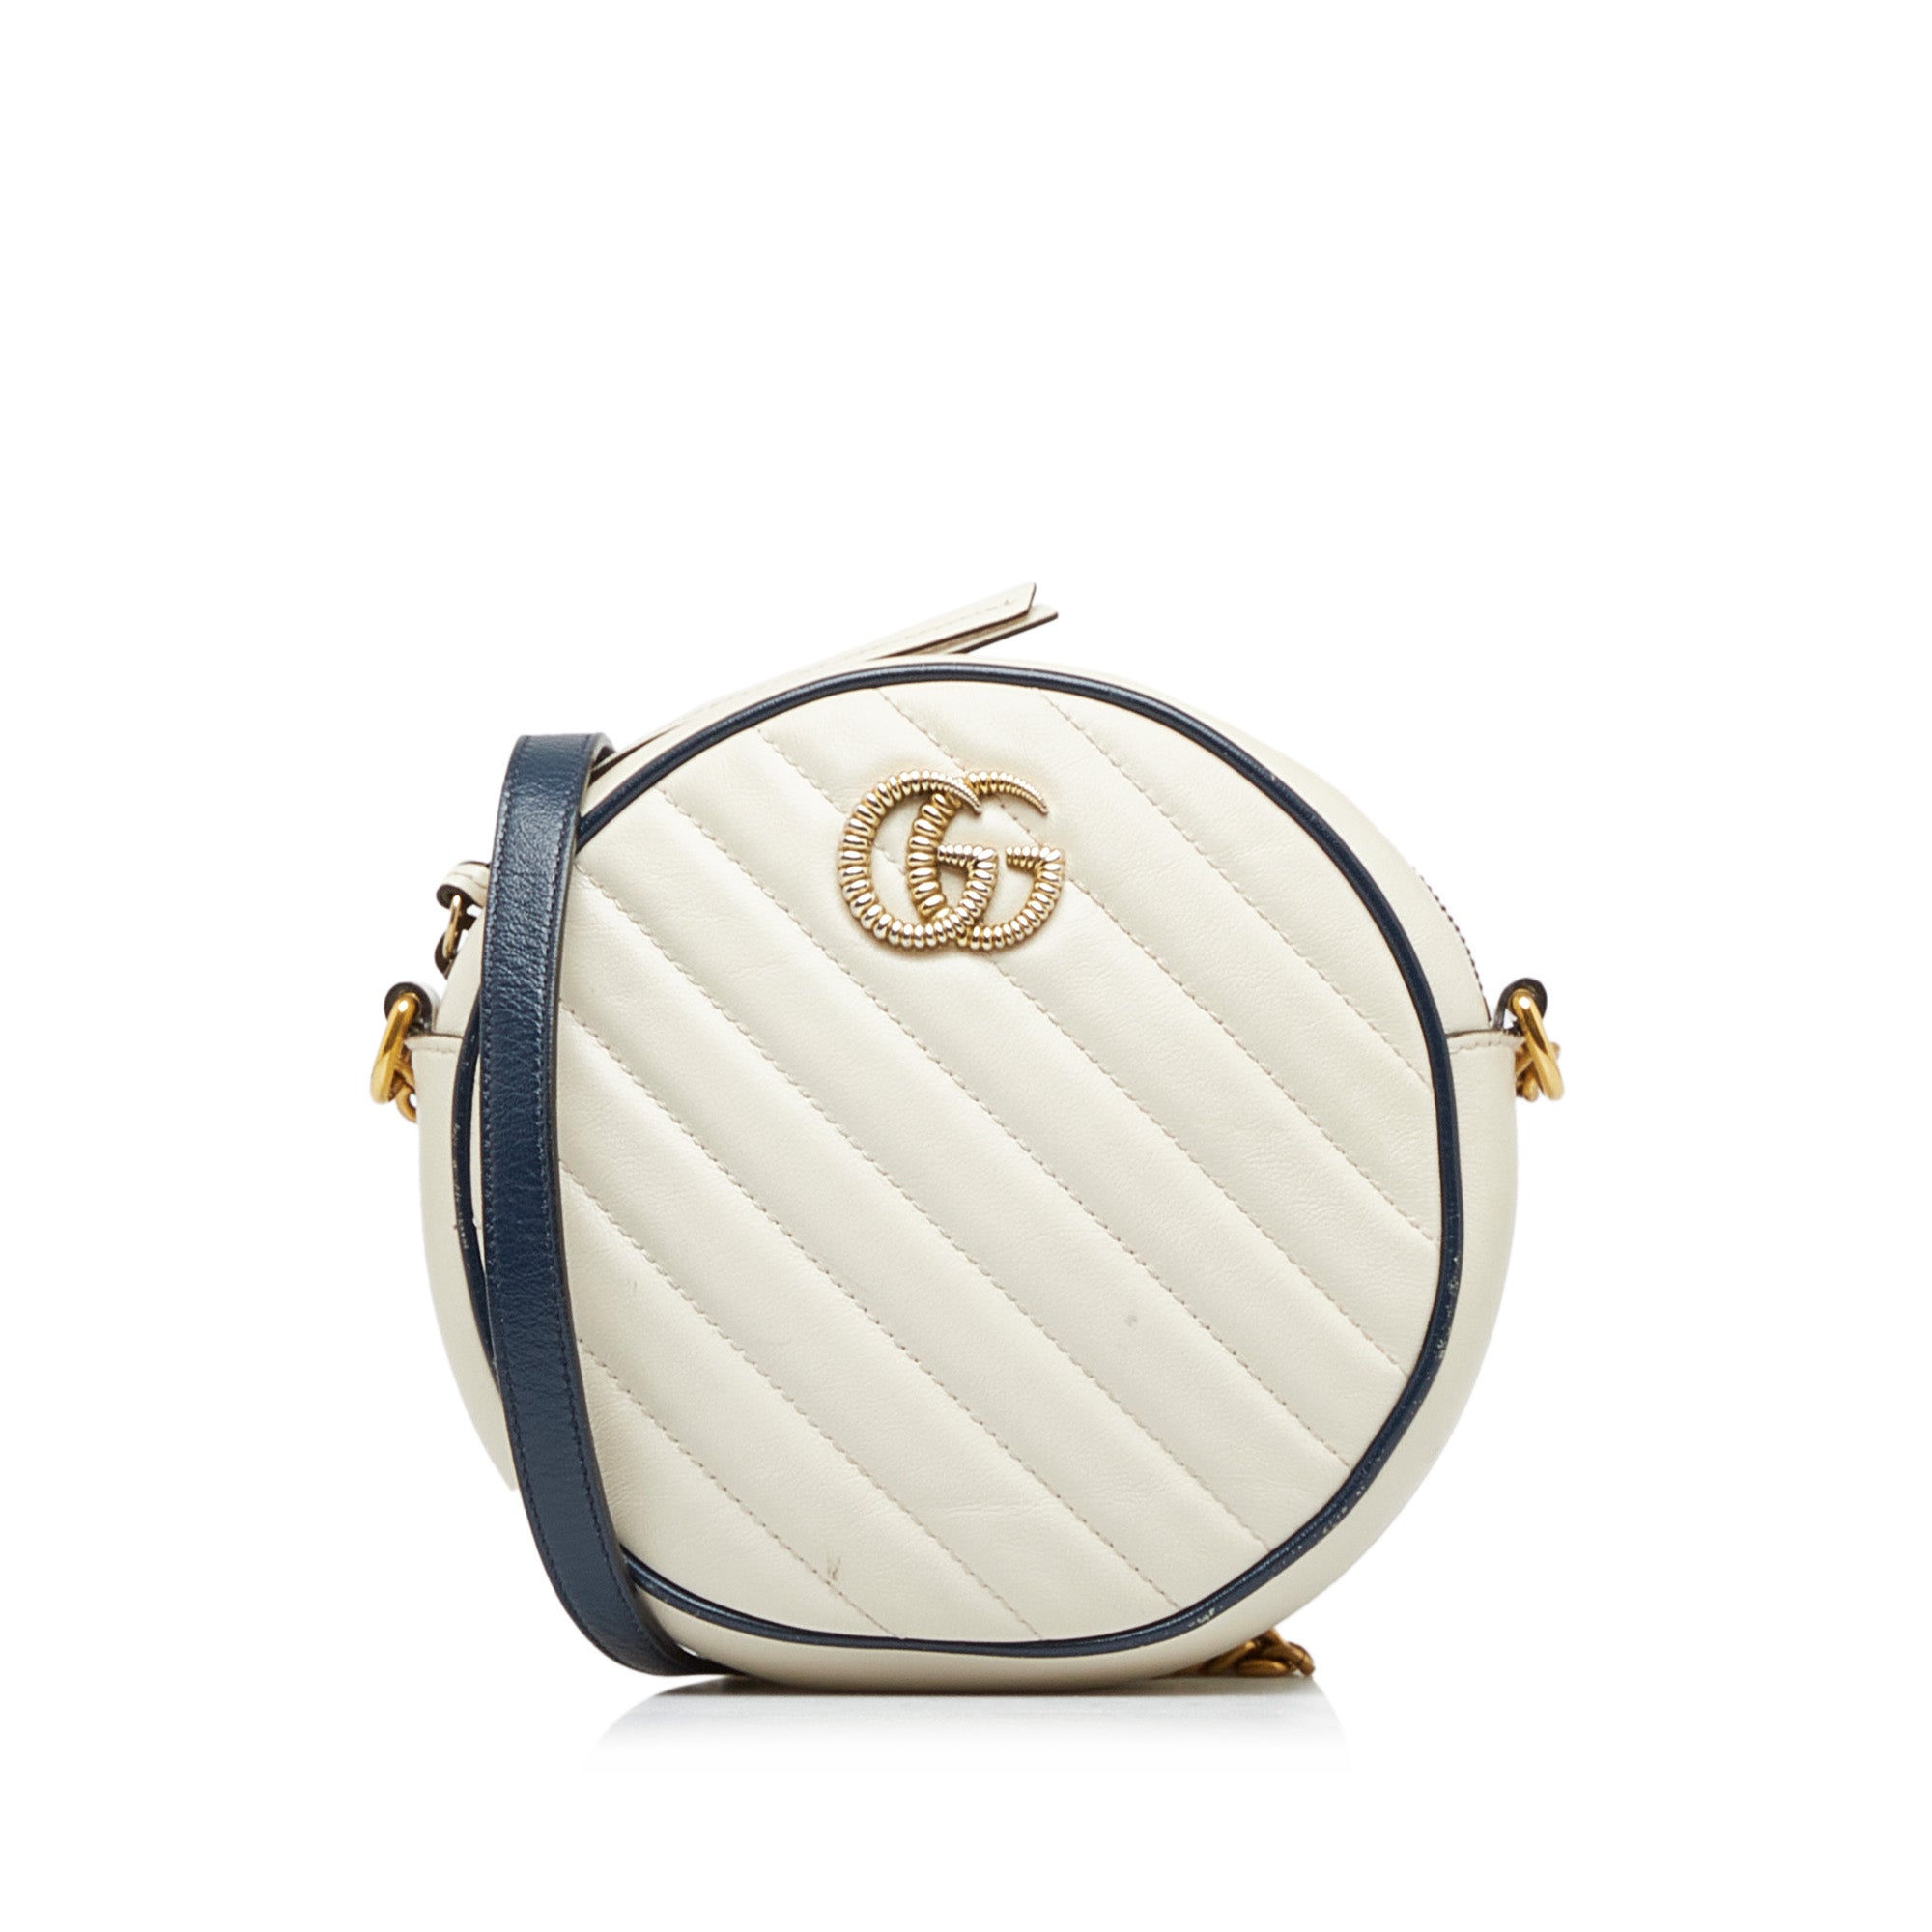 GG Marmont mini shoulder bag in white leather